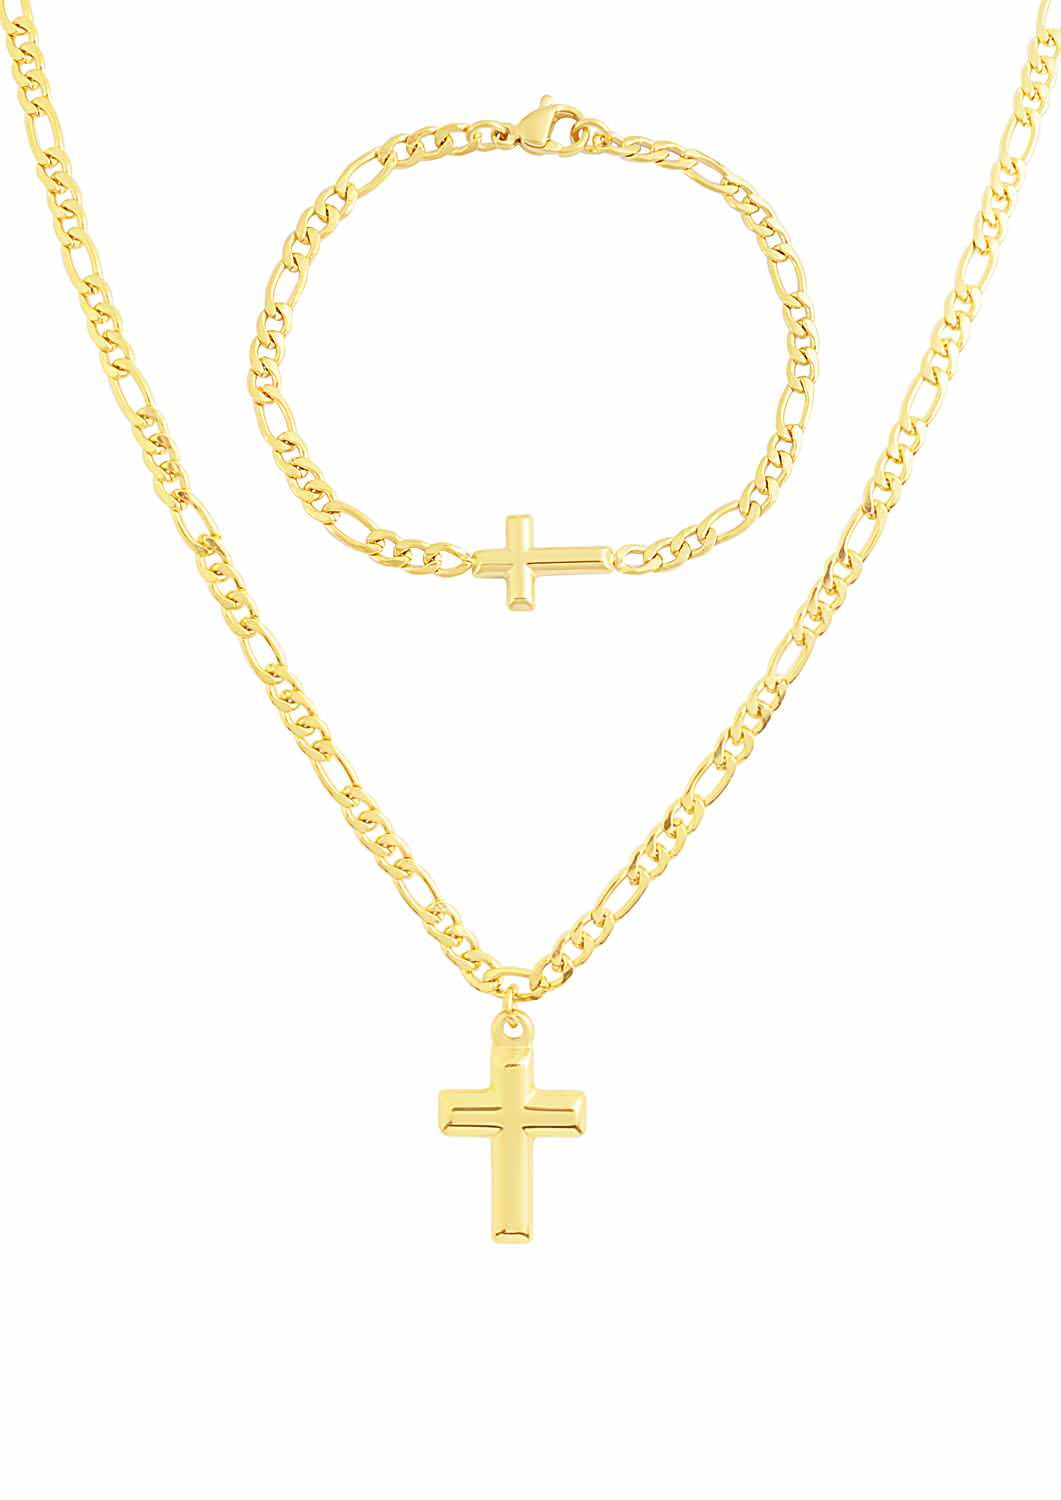 Roy Rose Jewelry Stainless Steel Yellow IP-Plated Chain Sideways Cross Neck 16.25'' inches Length 